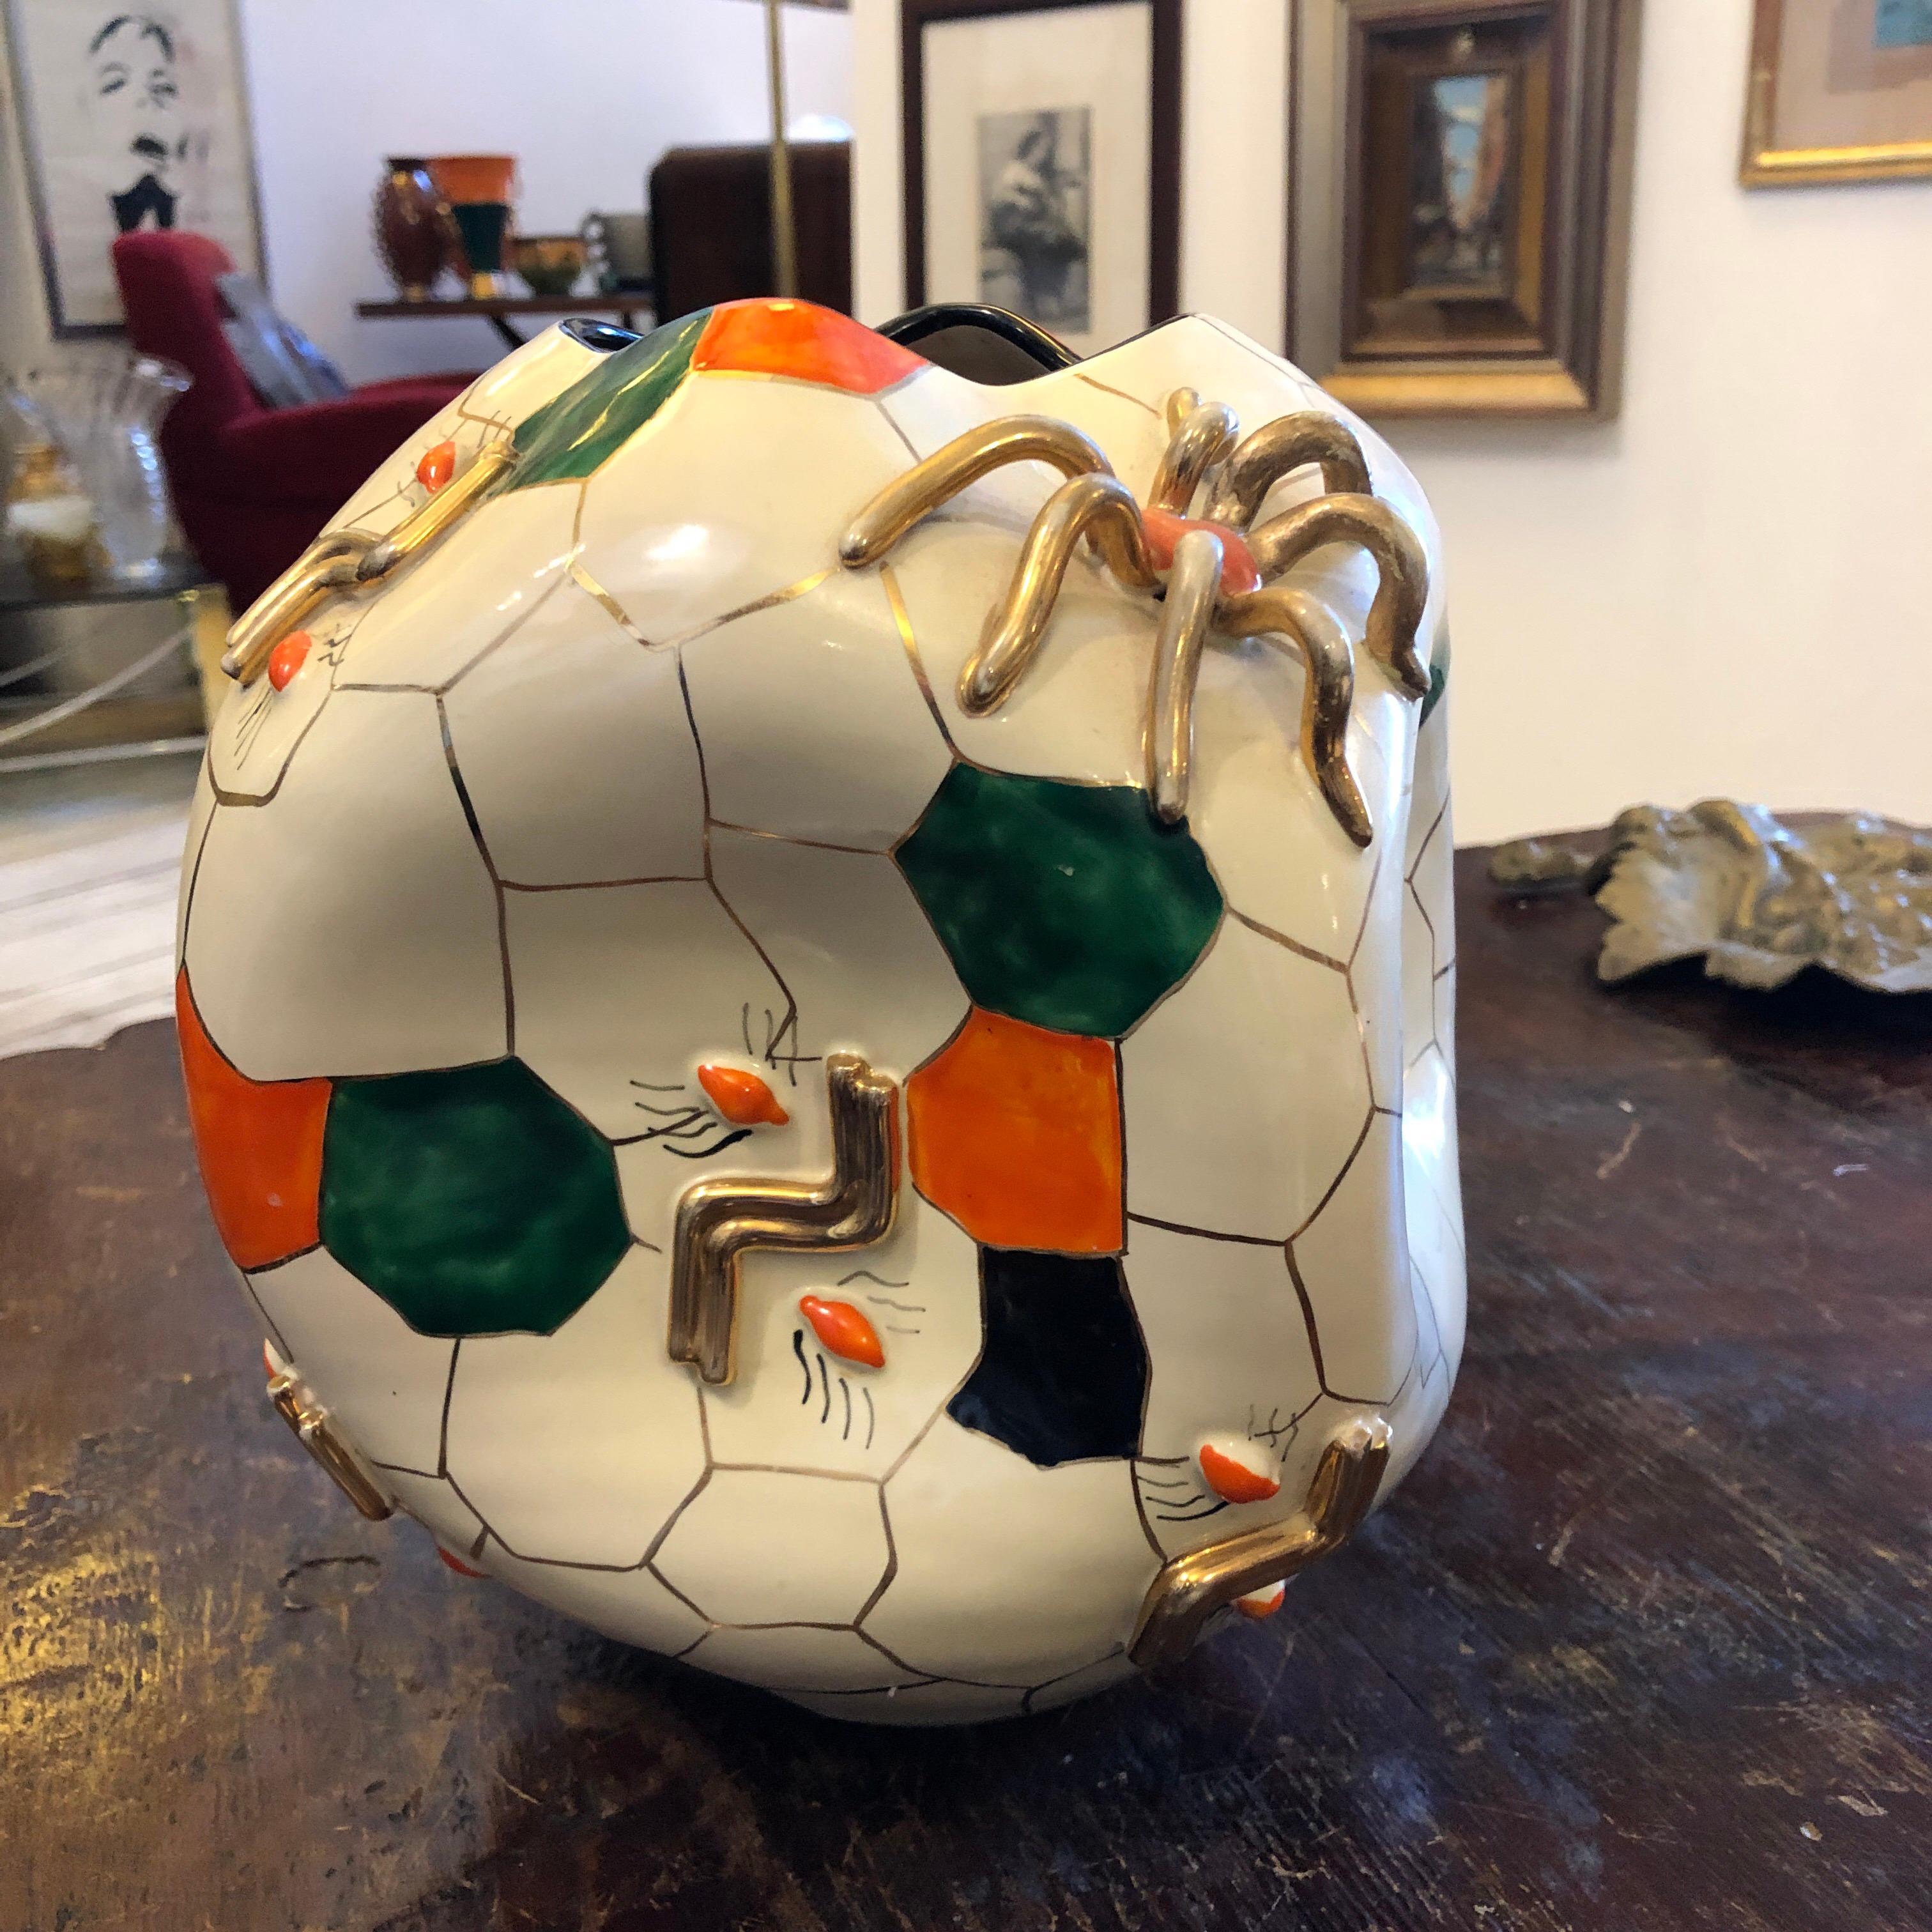 This is one of the most important vase made by Domenico Pucci. It's a cubic spider vase designed and made in 1952, it's on the cover of the book of Pucci ceramics.